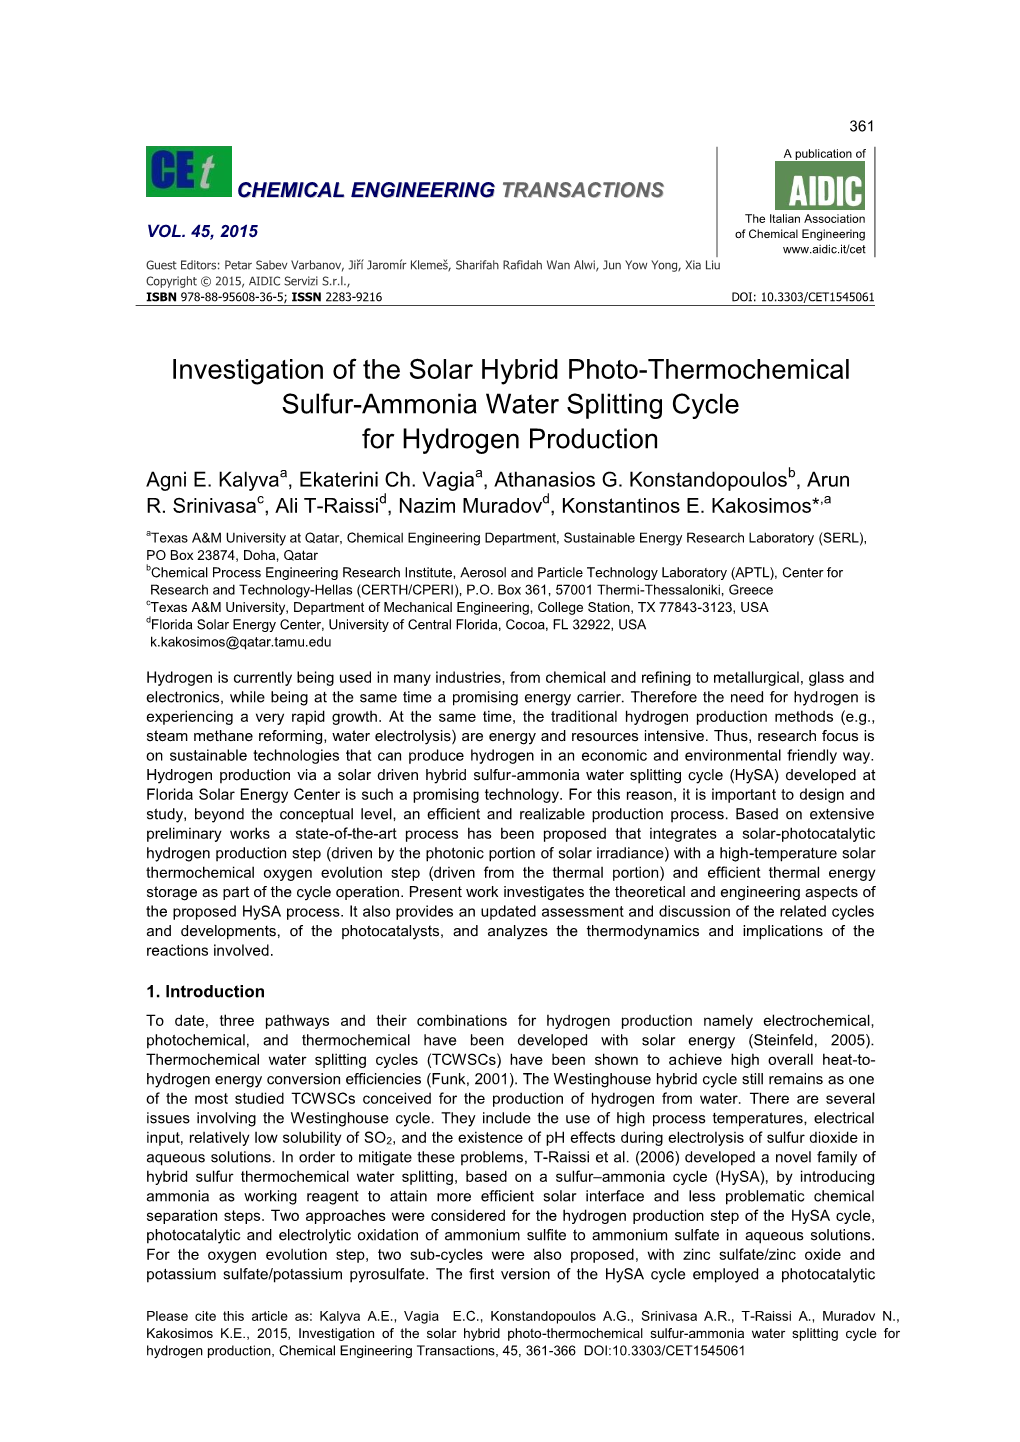 Investigation of the Solar Hybrid Photo-Thermochemical Sulfur-Ammonia Water Splitting Cycle for Hydrogen Production Agni E